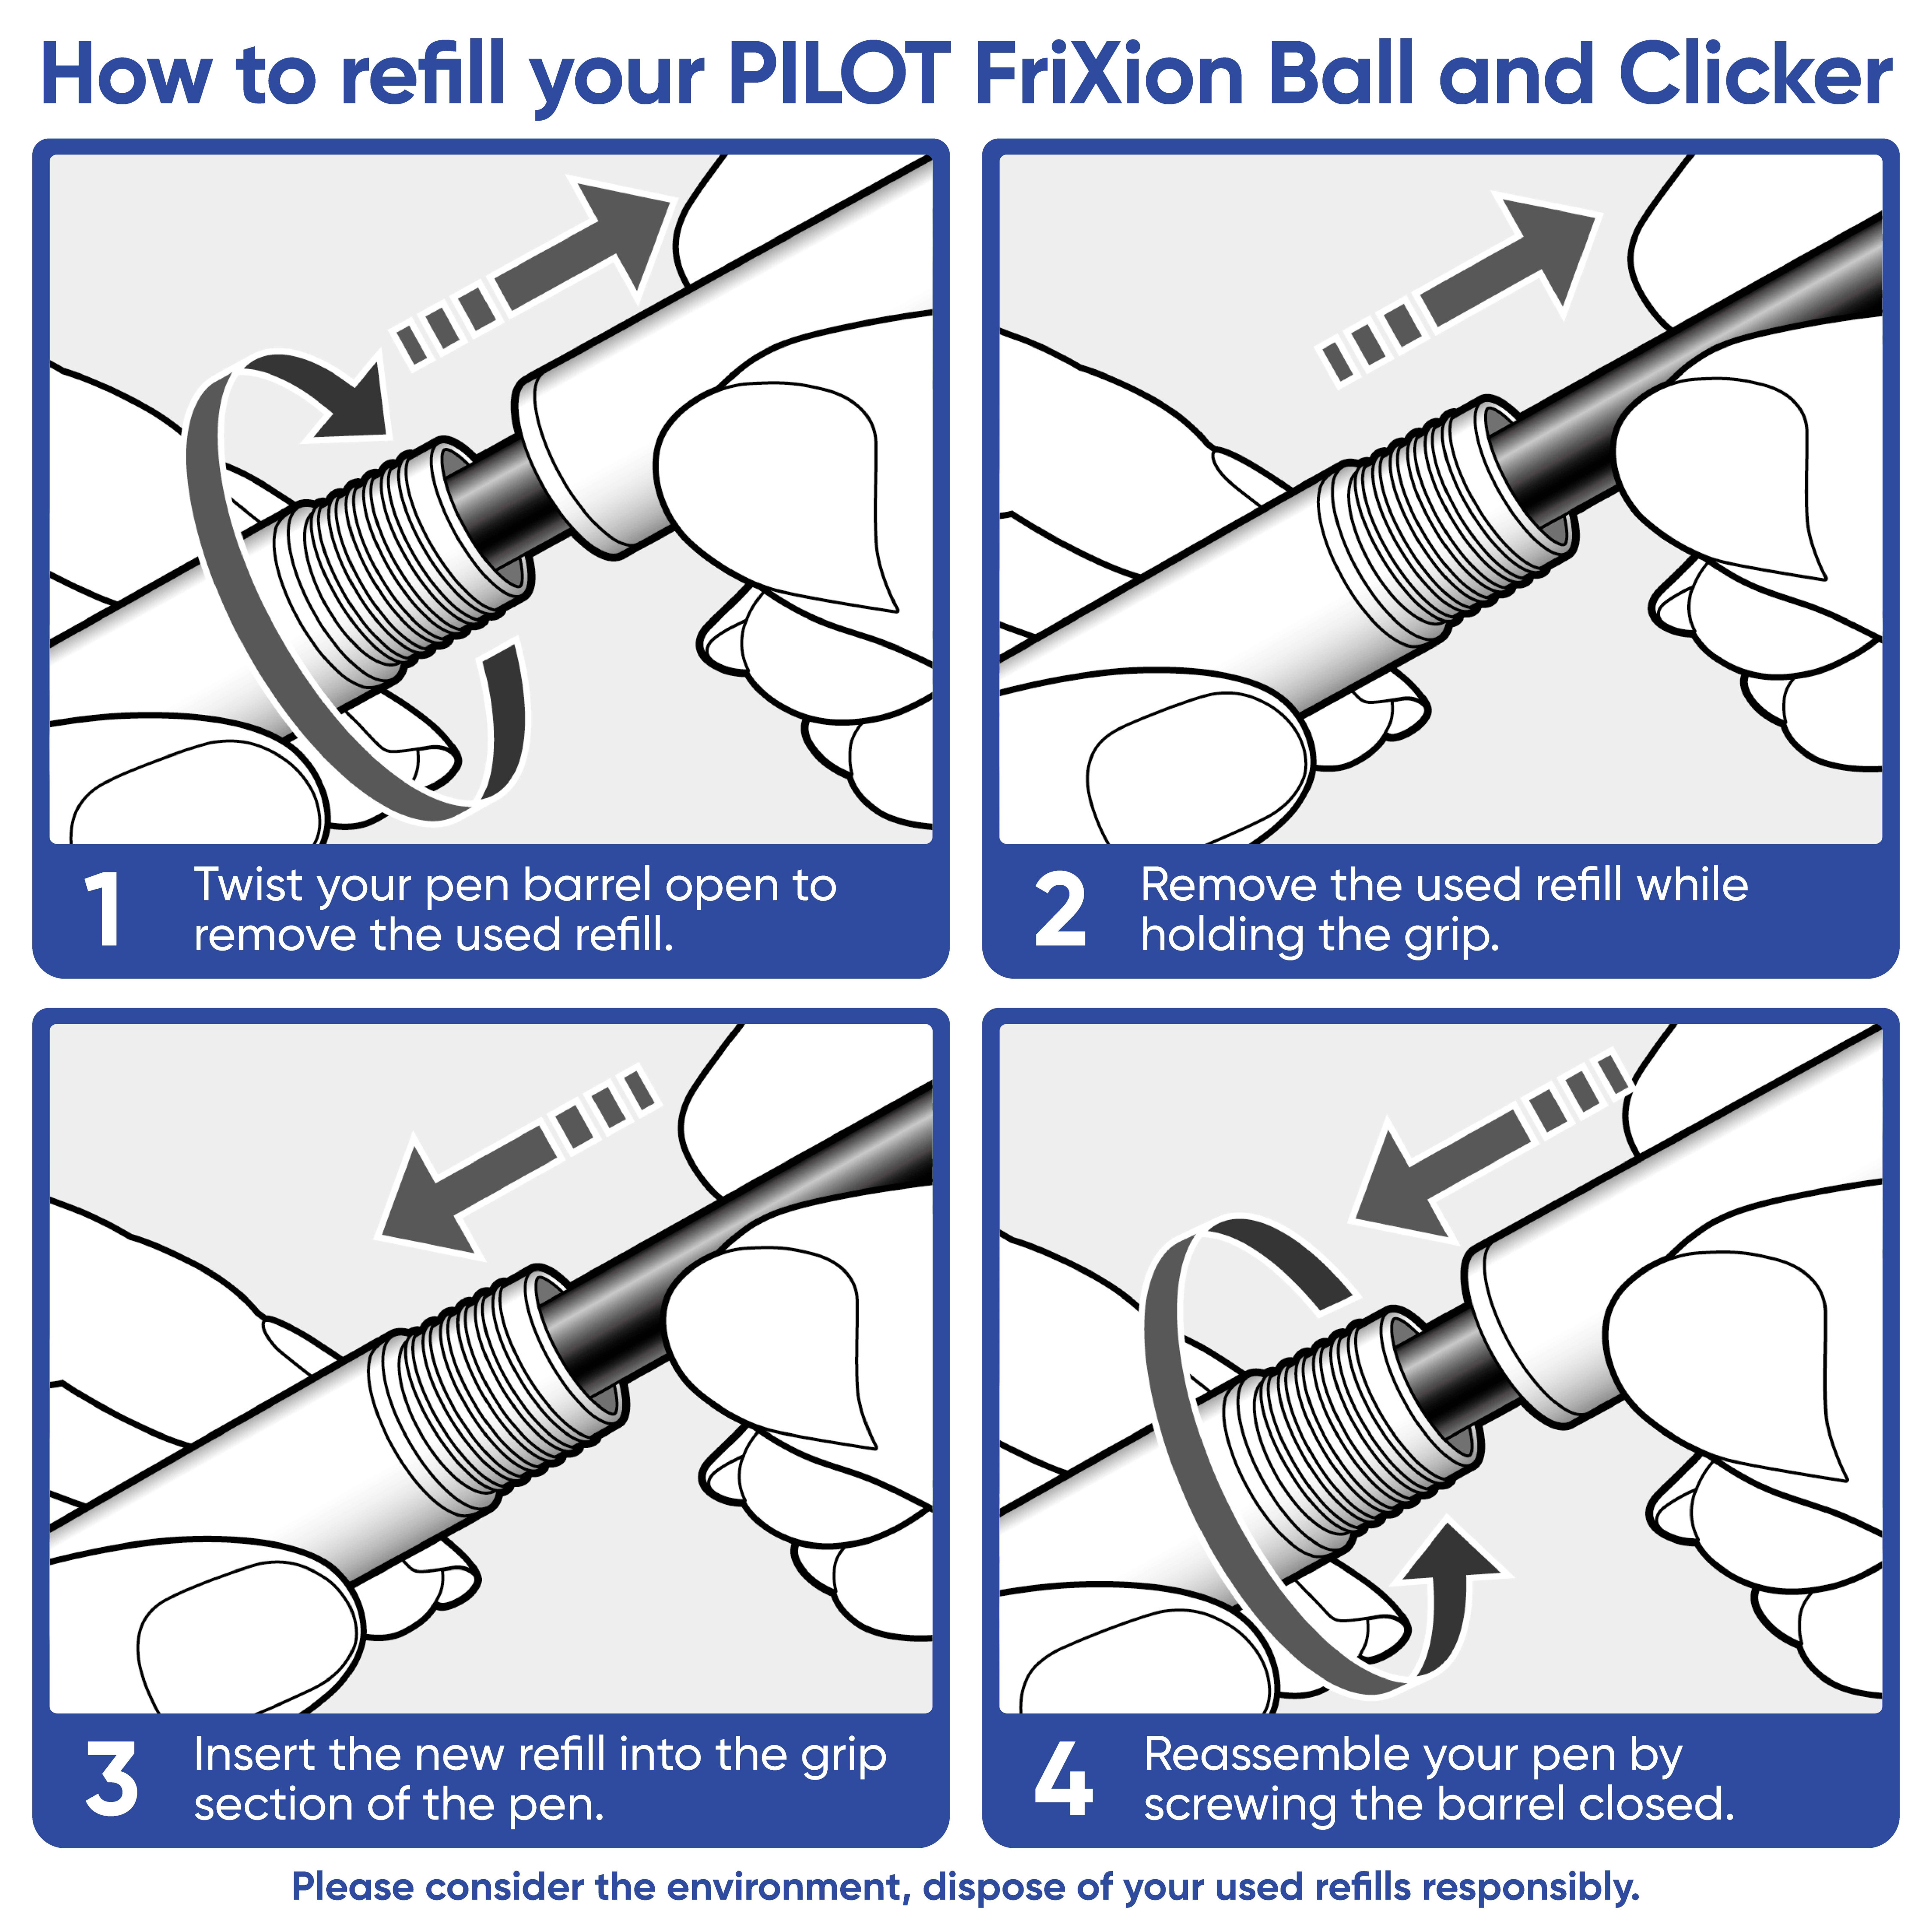 Instructions and diagram on refilling your PILOT FriXion Ball and Clicker pens. Step 1: 'Twist your pen barrel open to remove the used refill.' Step 2: 'Remove the used refill while holding the grip.' Step 3: 'Insert the new refill into the grip section of the pen.' Step 4: 'Reassemble your pen by screwing the barrel closed.' A reminder at the bottom states: 'Please consider the environment, dispose of your used refills responsibly.